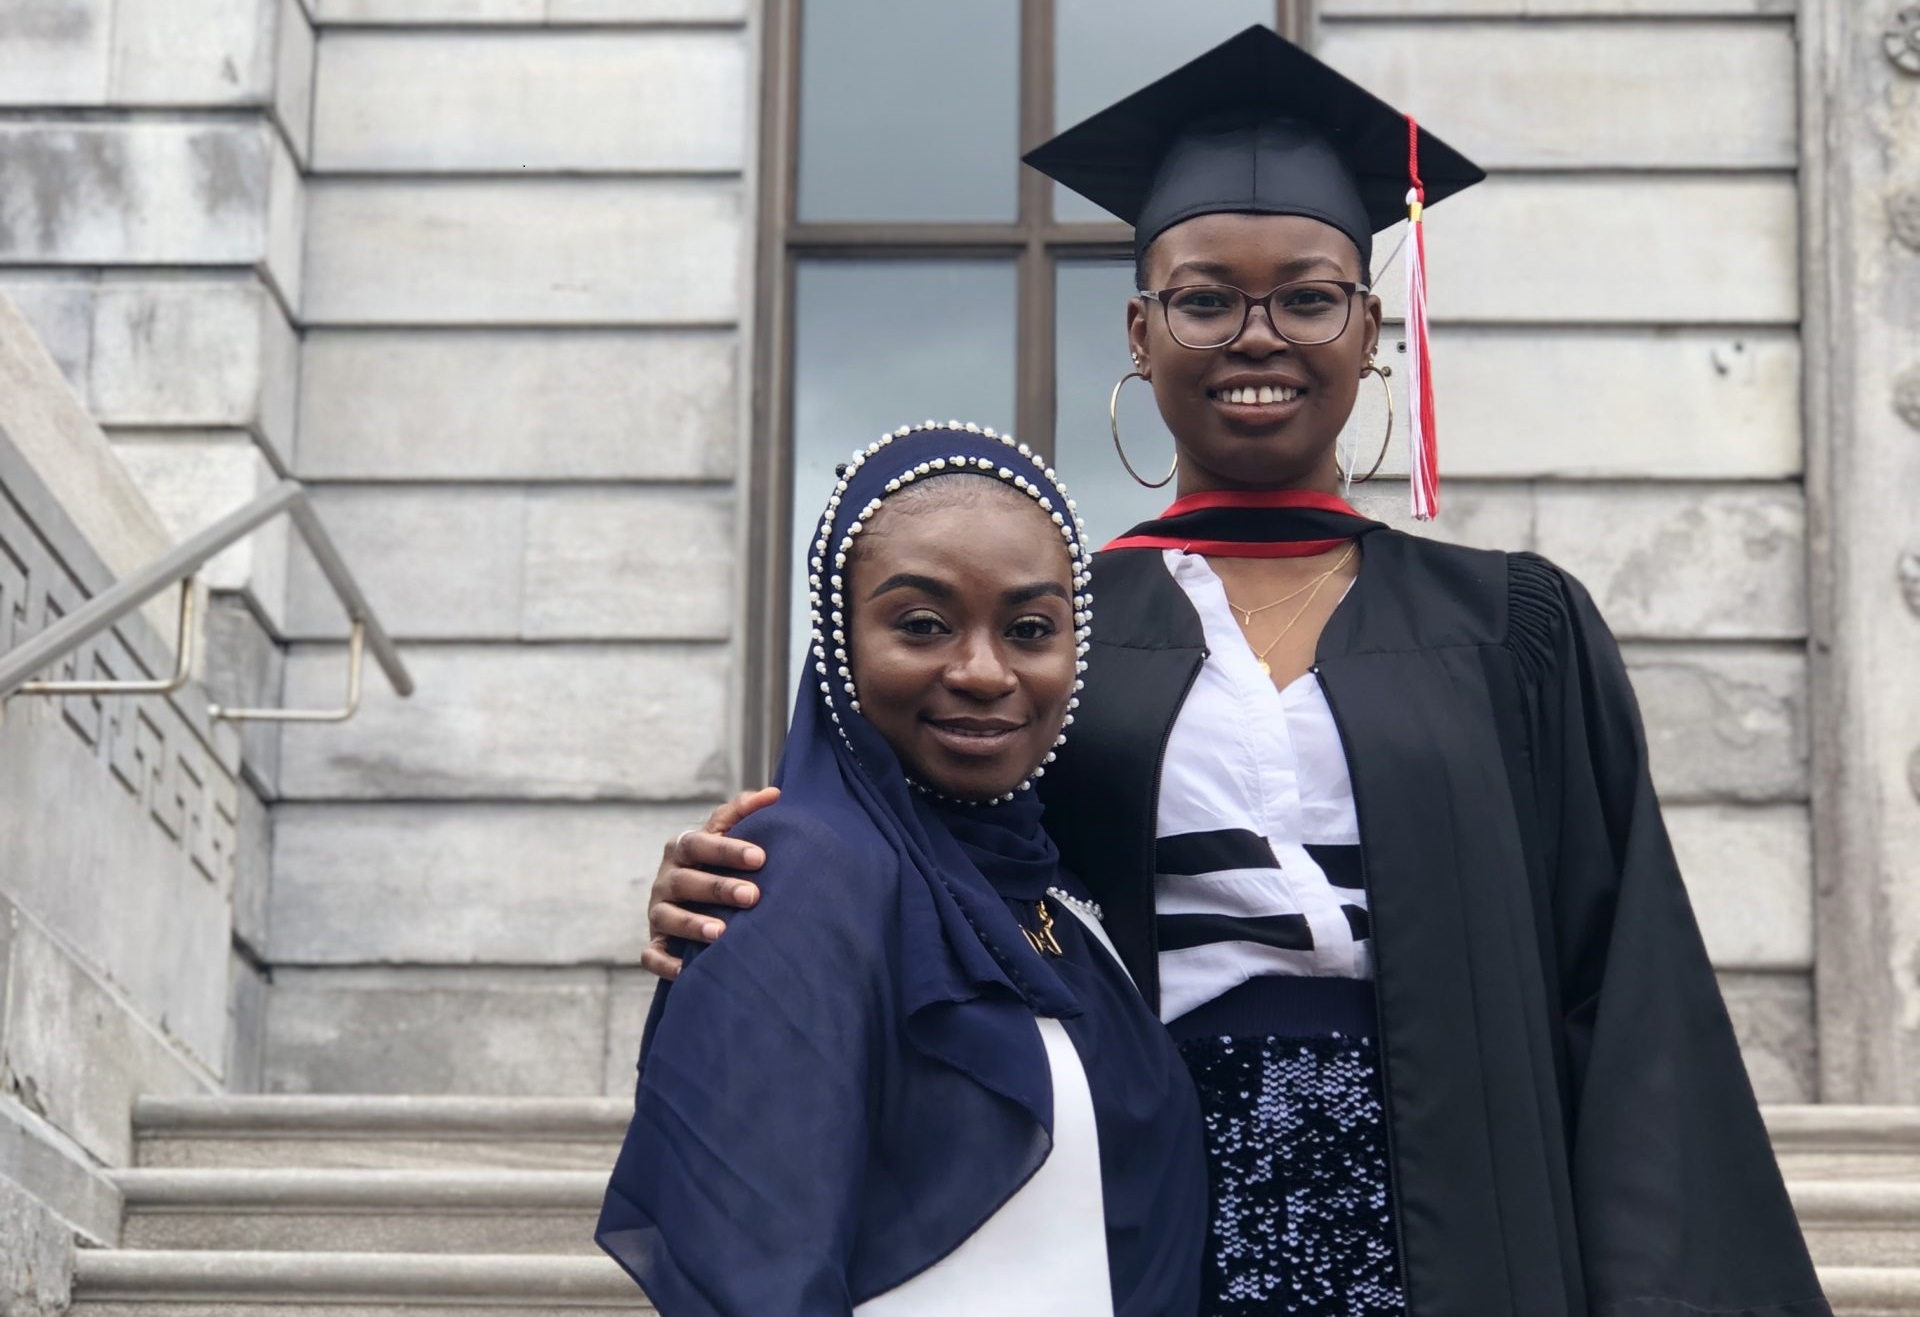 The image of Ipti, a Mastercard foundation scholar wearing a graduation gown with a friend